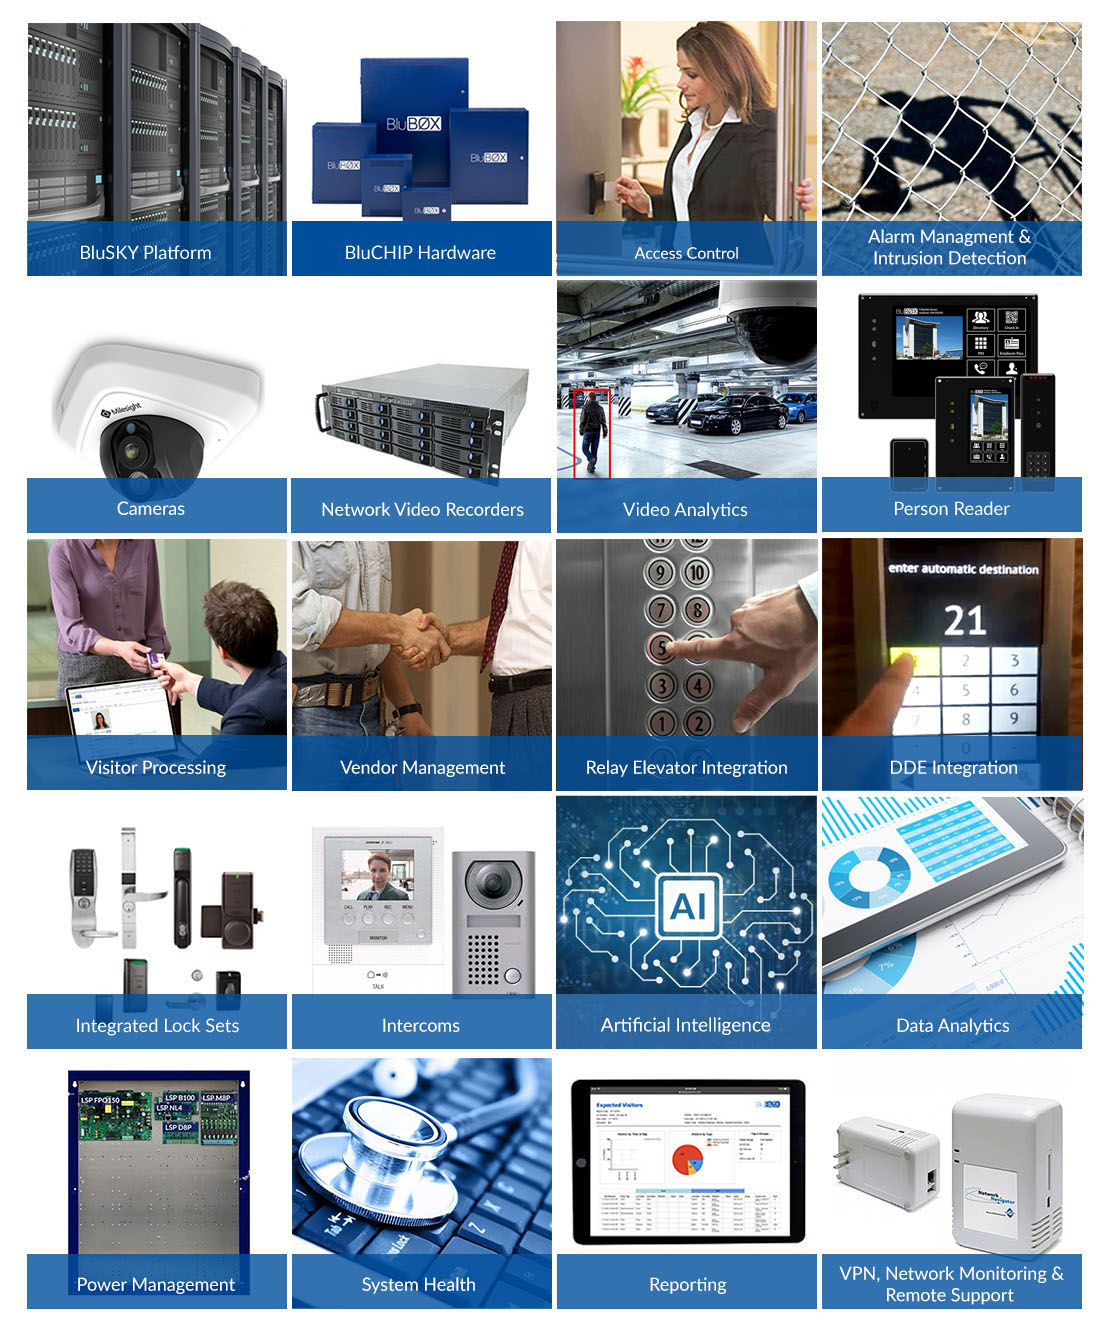 BluINFO_products_image_2020.jpg